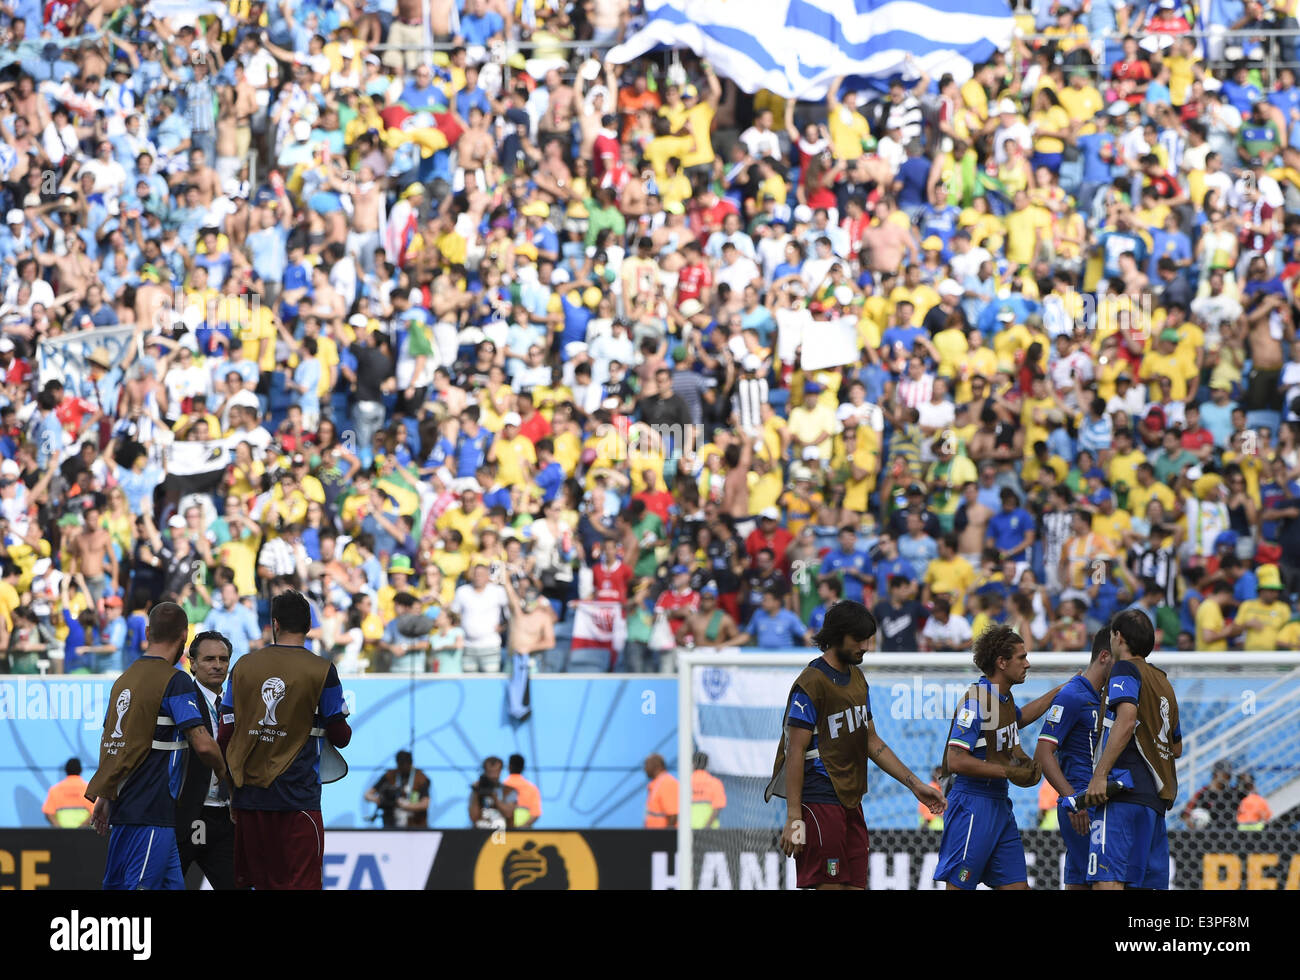 Natal, Brazil. 24th June, 2014. Italy's players leave the field after a Group D match between Italy and Uruguay of 2014 FIFA World Cup at the Estadio das Dunas Stadium in Natal, Brazil, June 24, 2014. Uruguay won 1-0 over Italy on Tuesday. © Lui Siu Wai/Xinhua/Alamy Live News Stock Photo